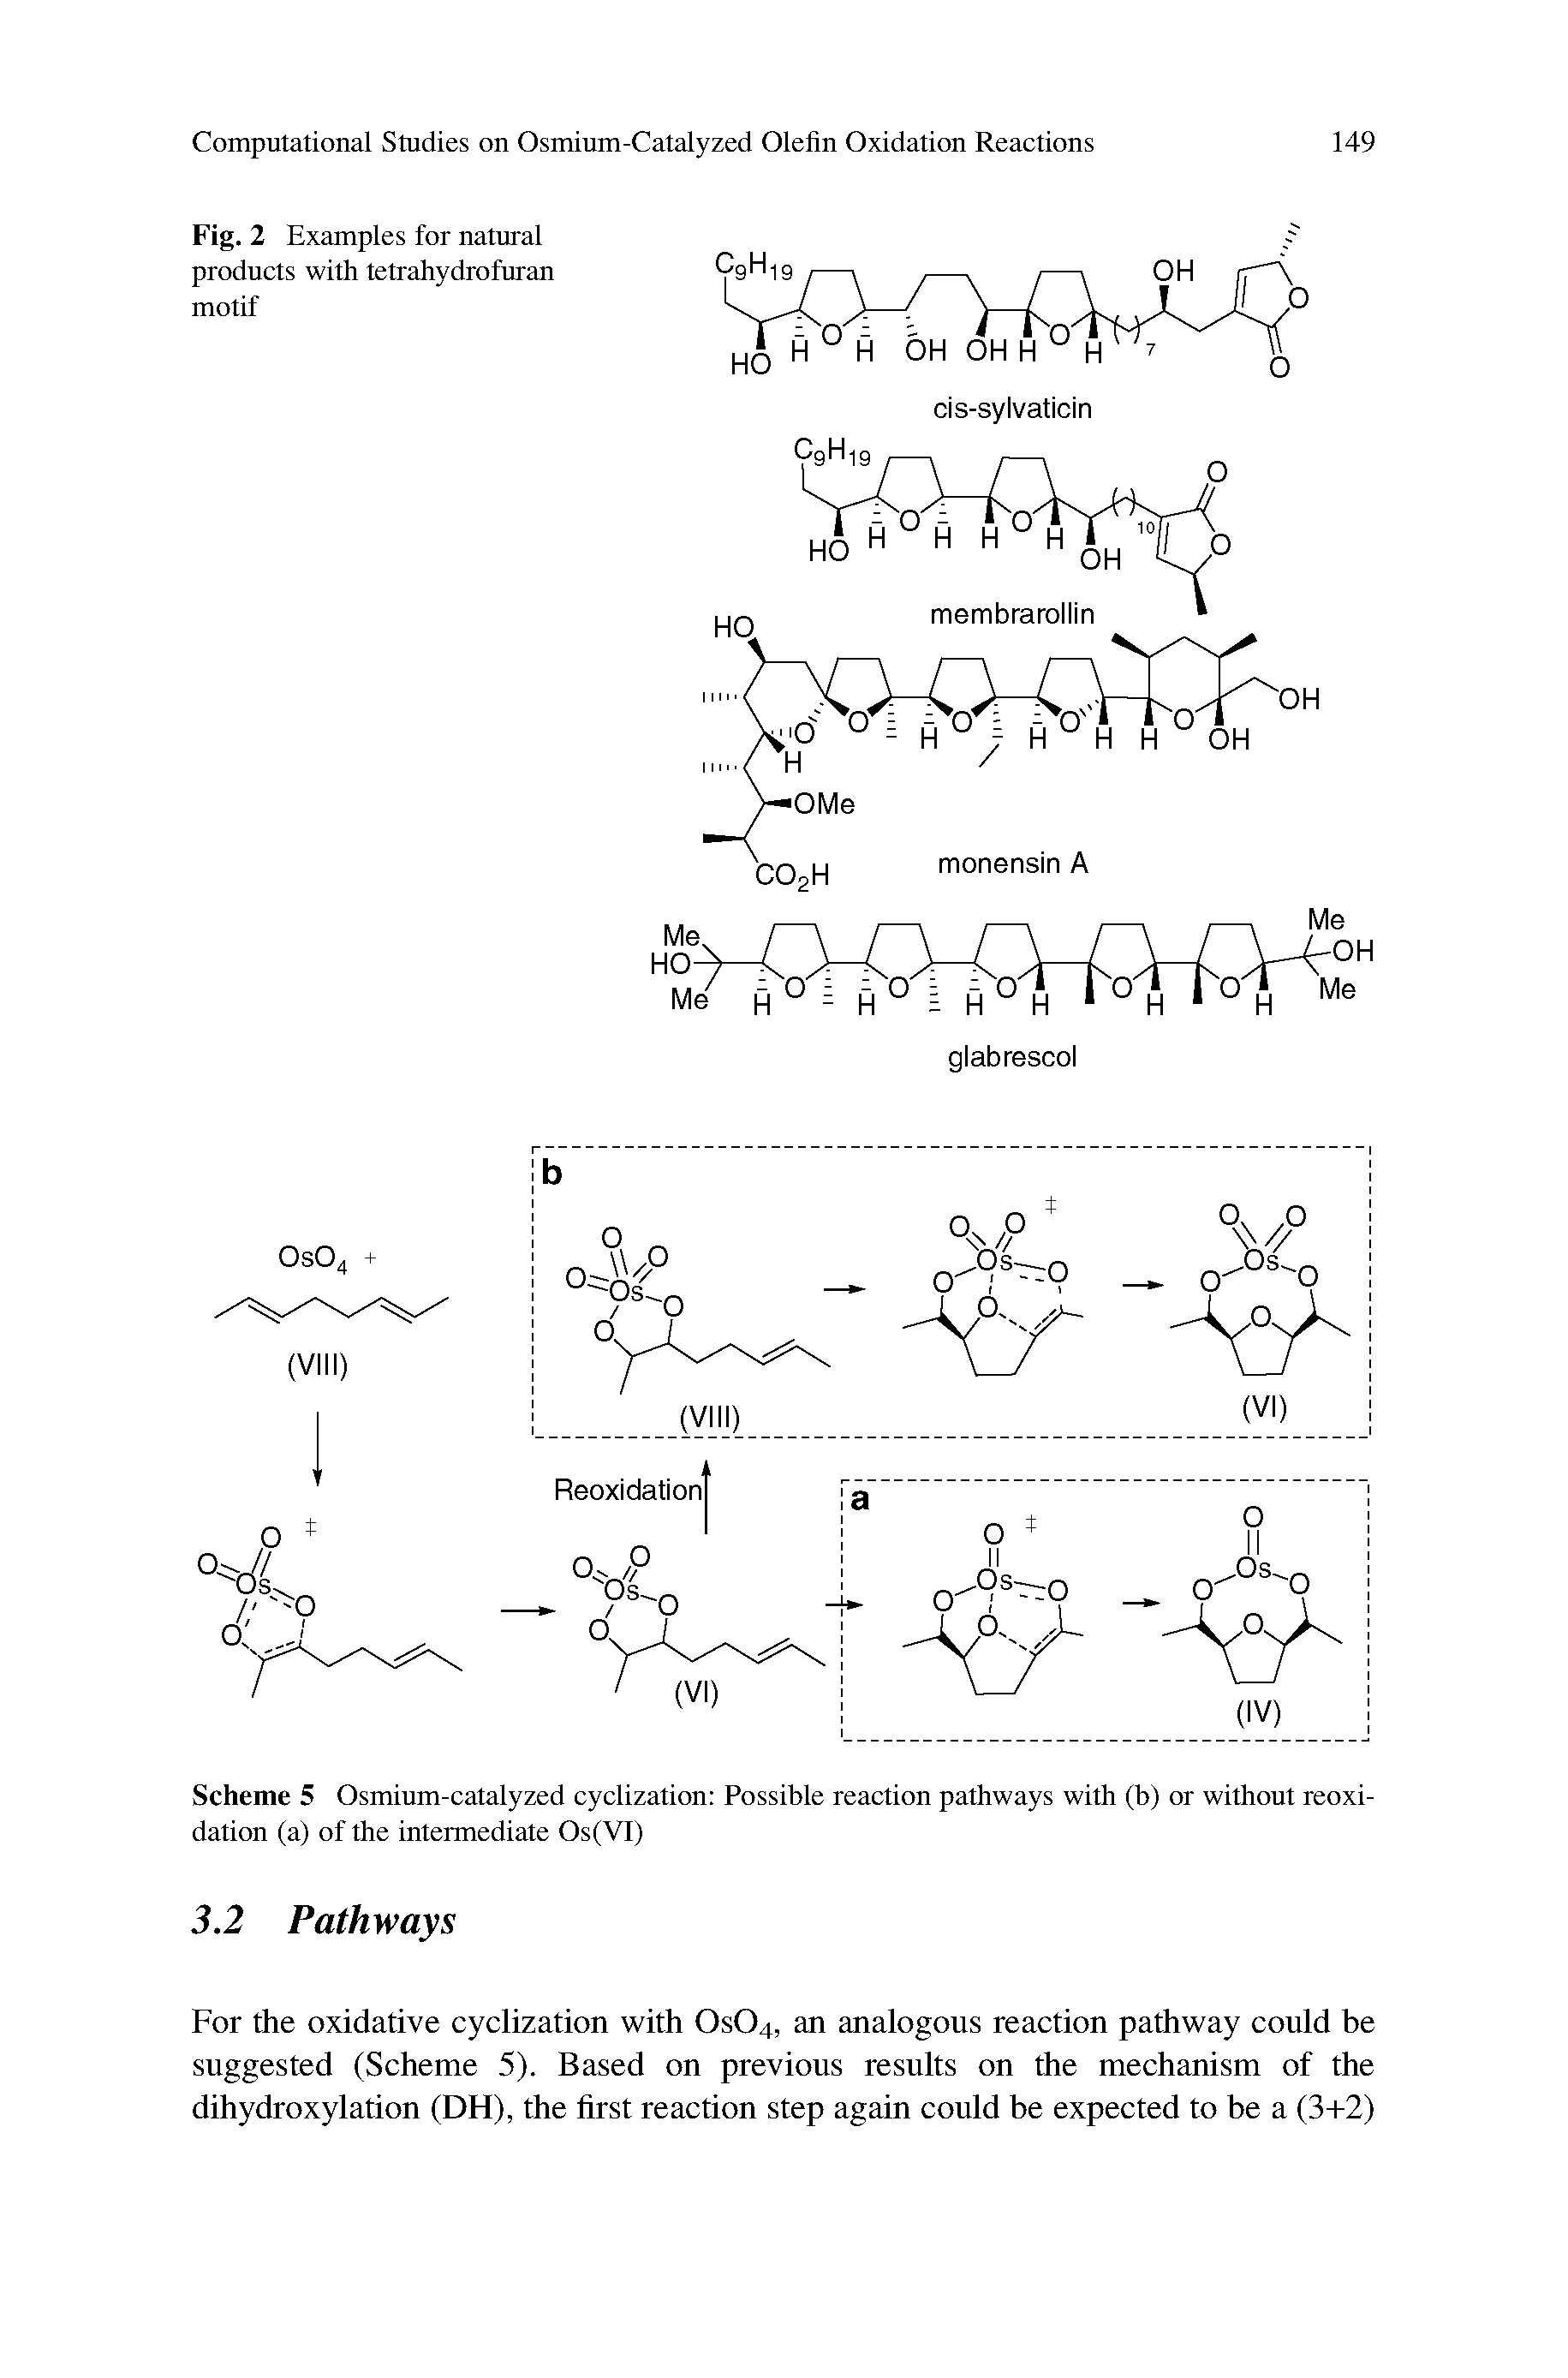 Fig. 2 Examples for natural products with tetrahydrofuran motif...